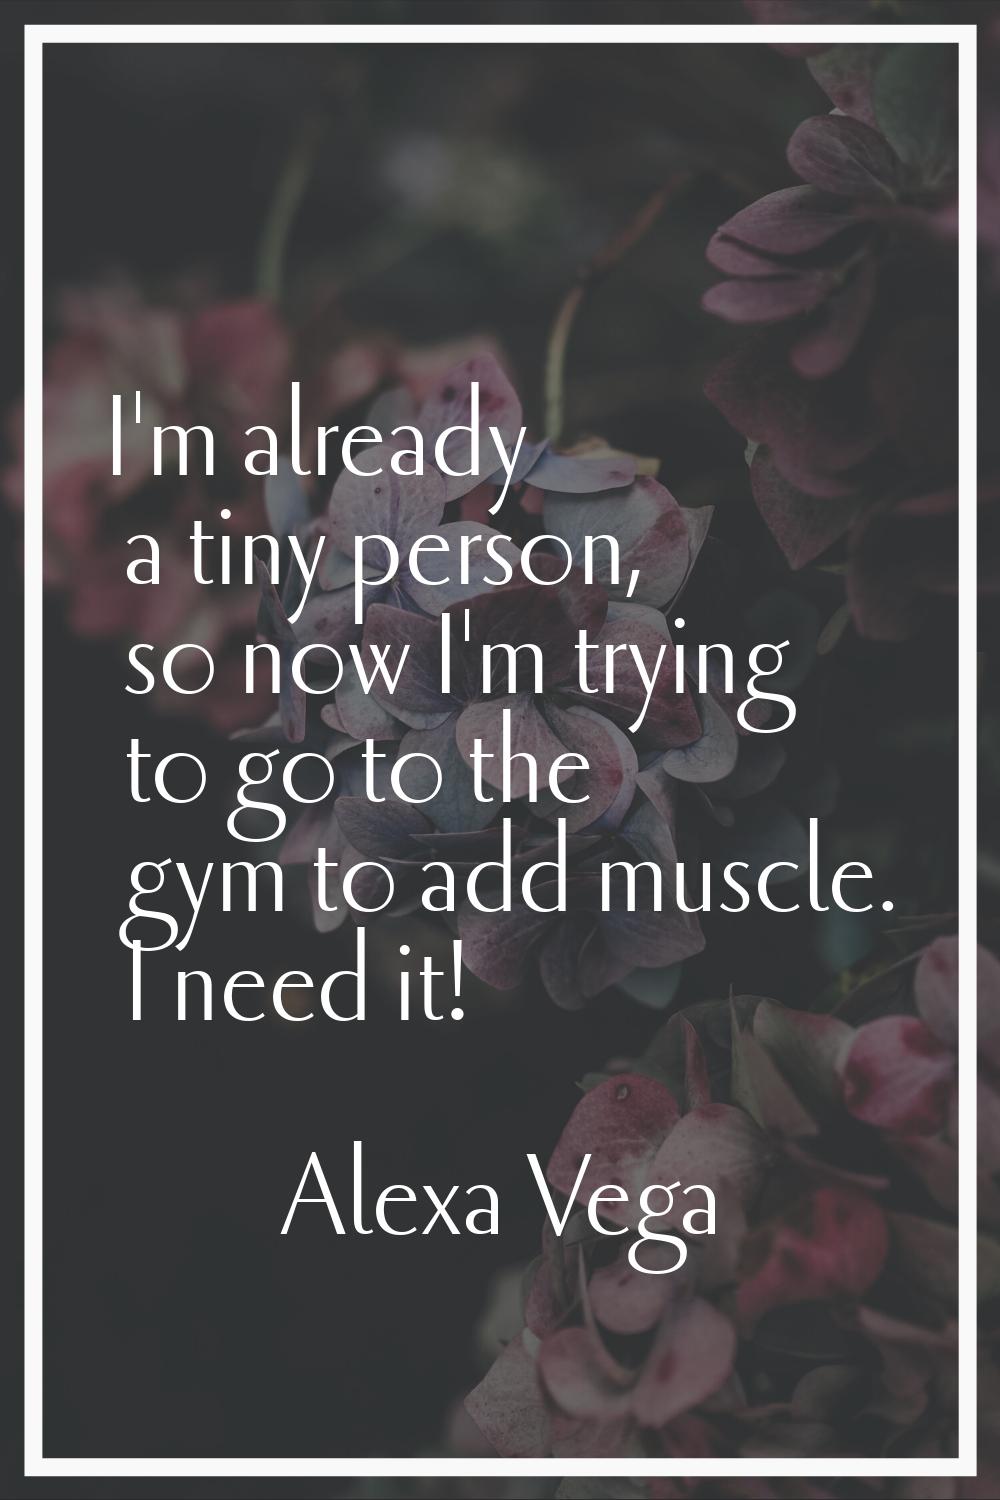 I'm already a tiny person, so now I'm trying to go to the gym to add muscle. I need it!